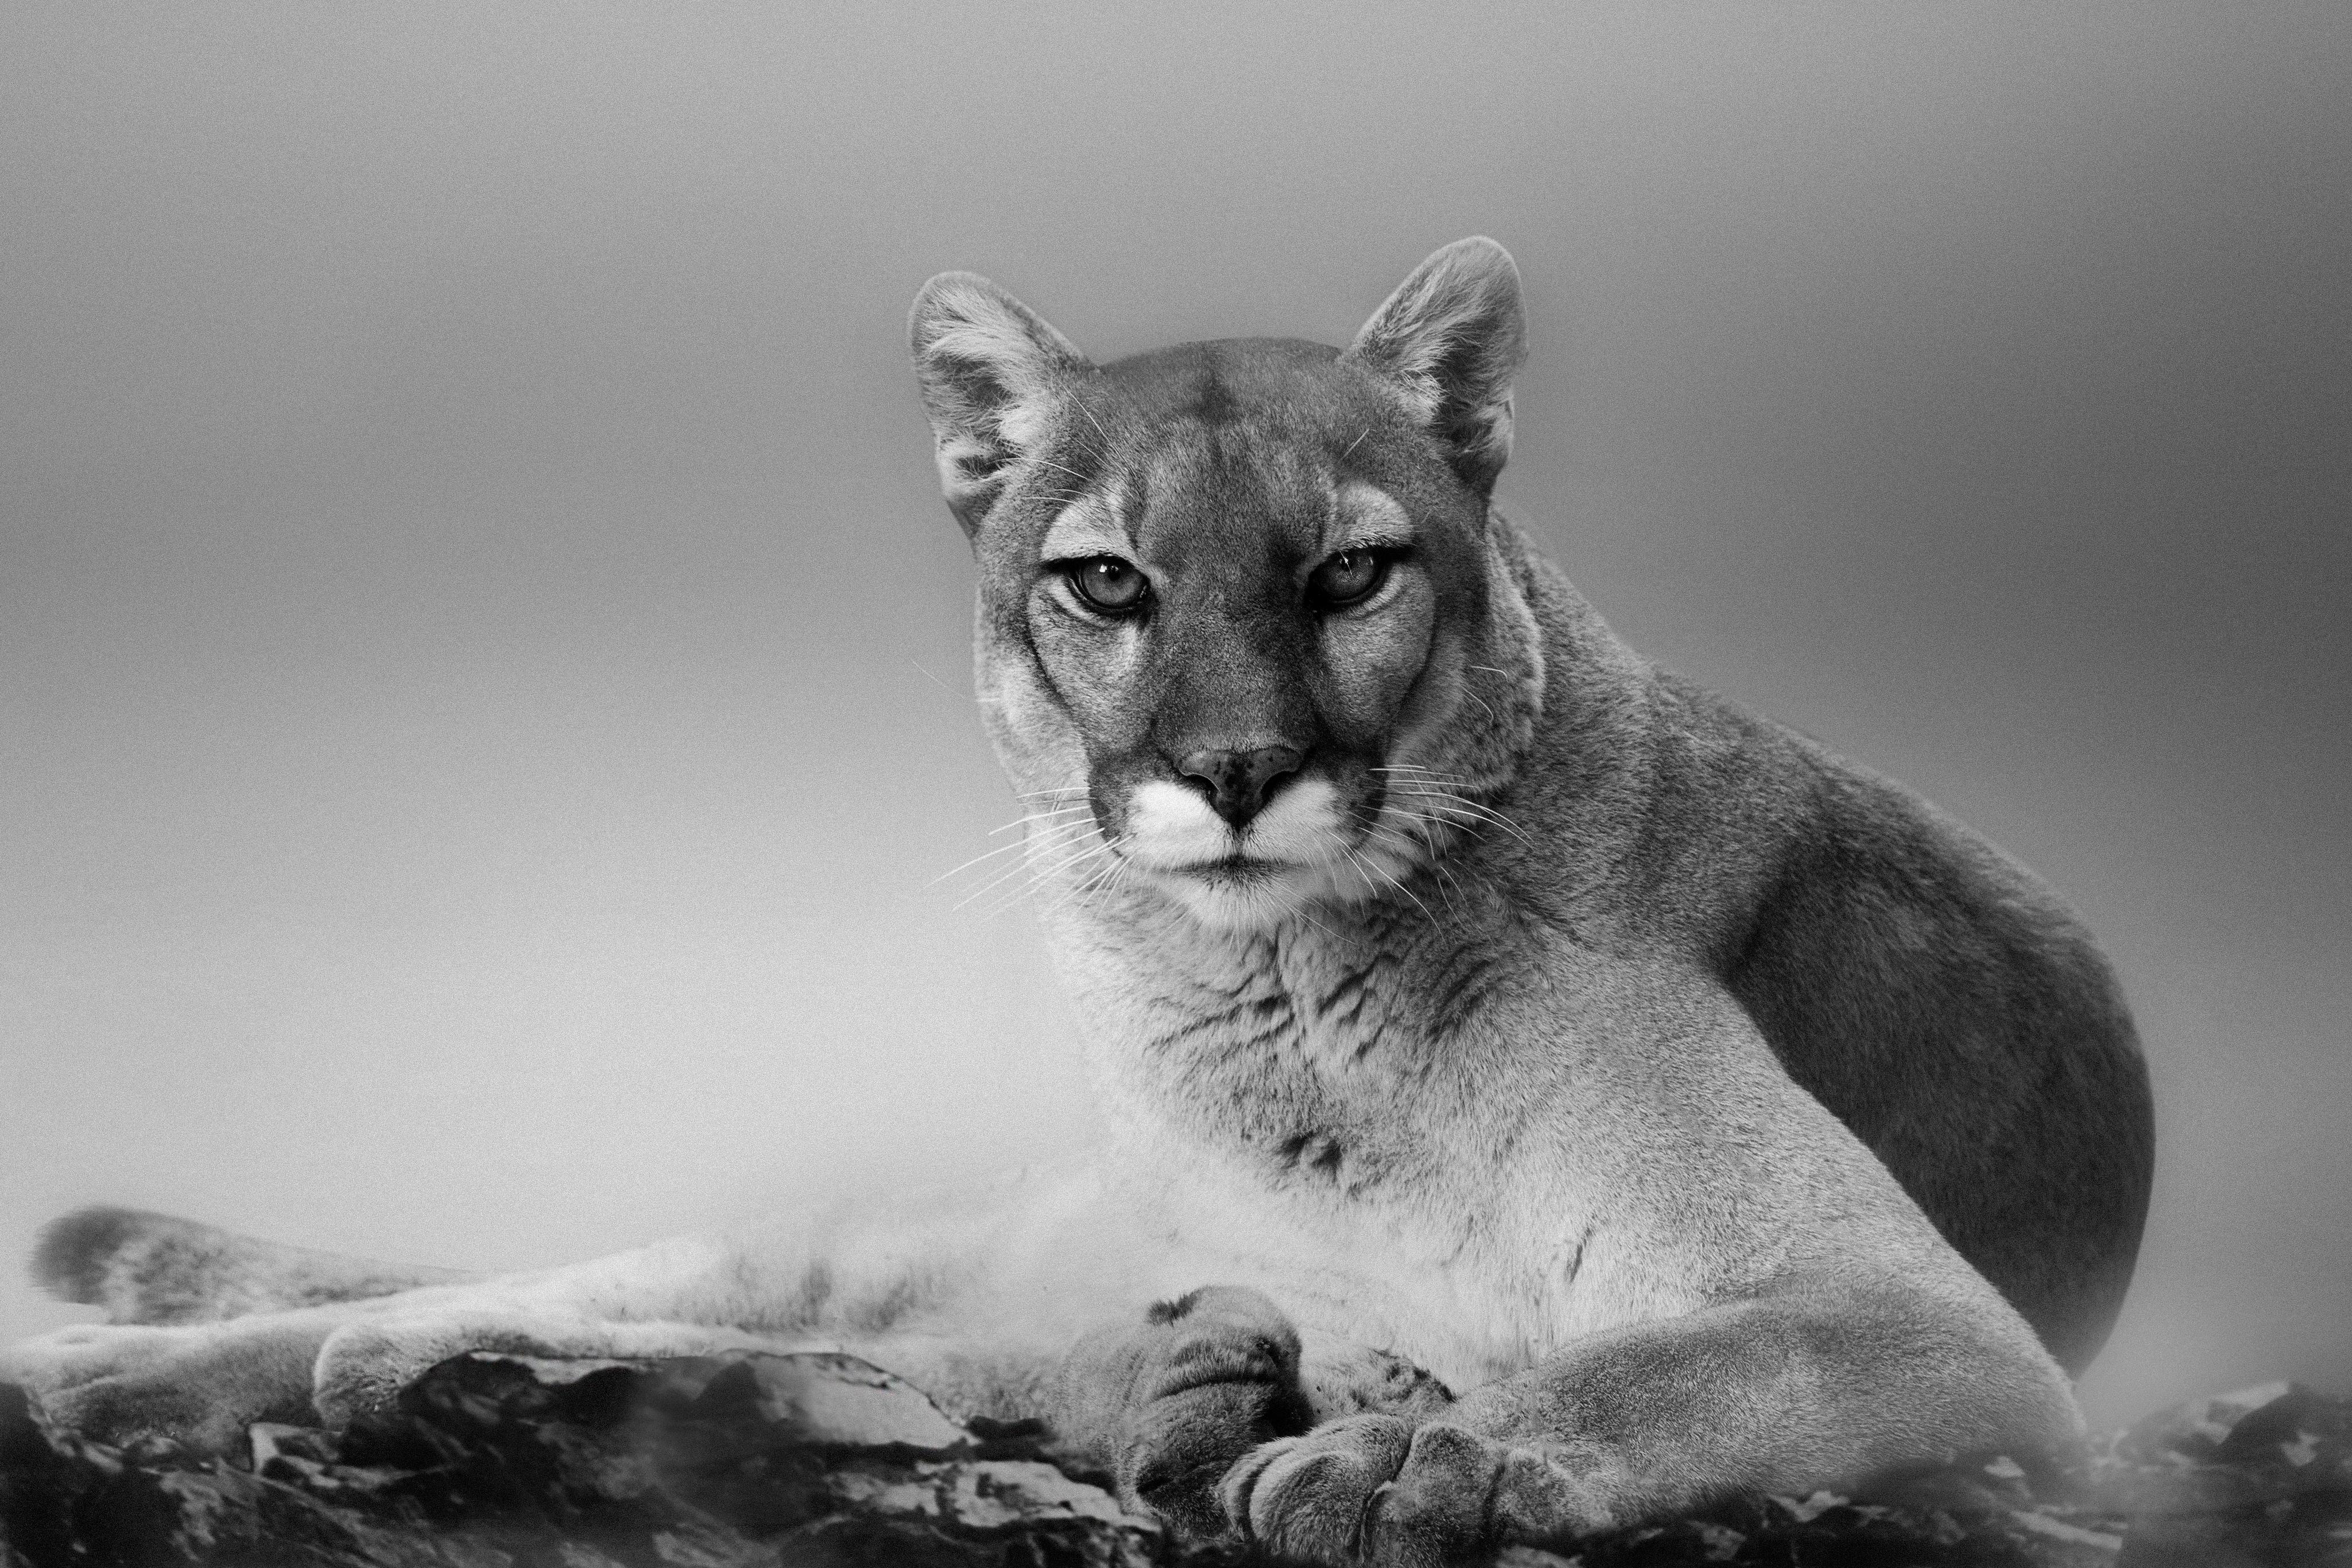 Shane Russeck Black and White Photograph - Cougar Print 36x48 - Fine Art Photography of Mountain Lion, Photograph Unsigned